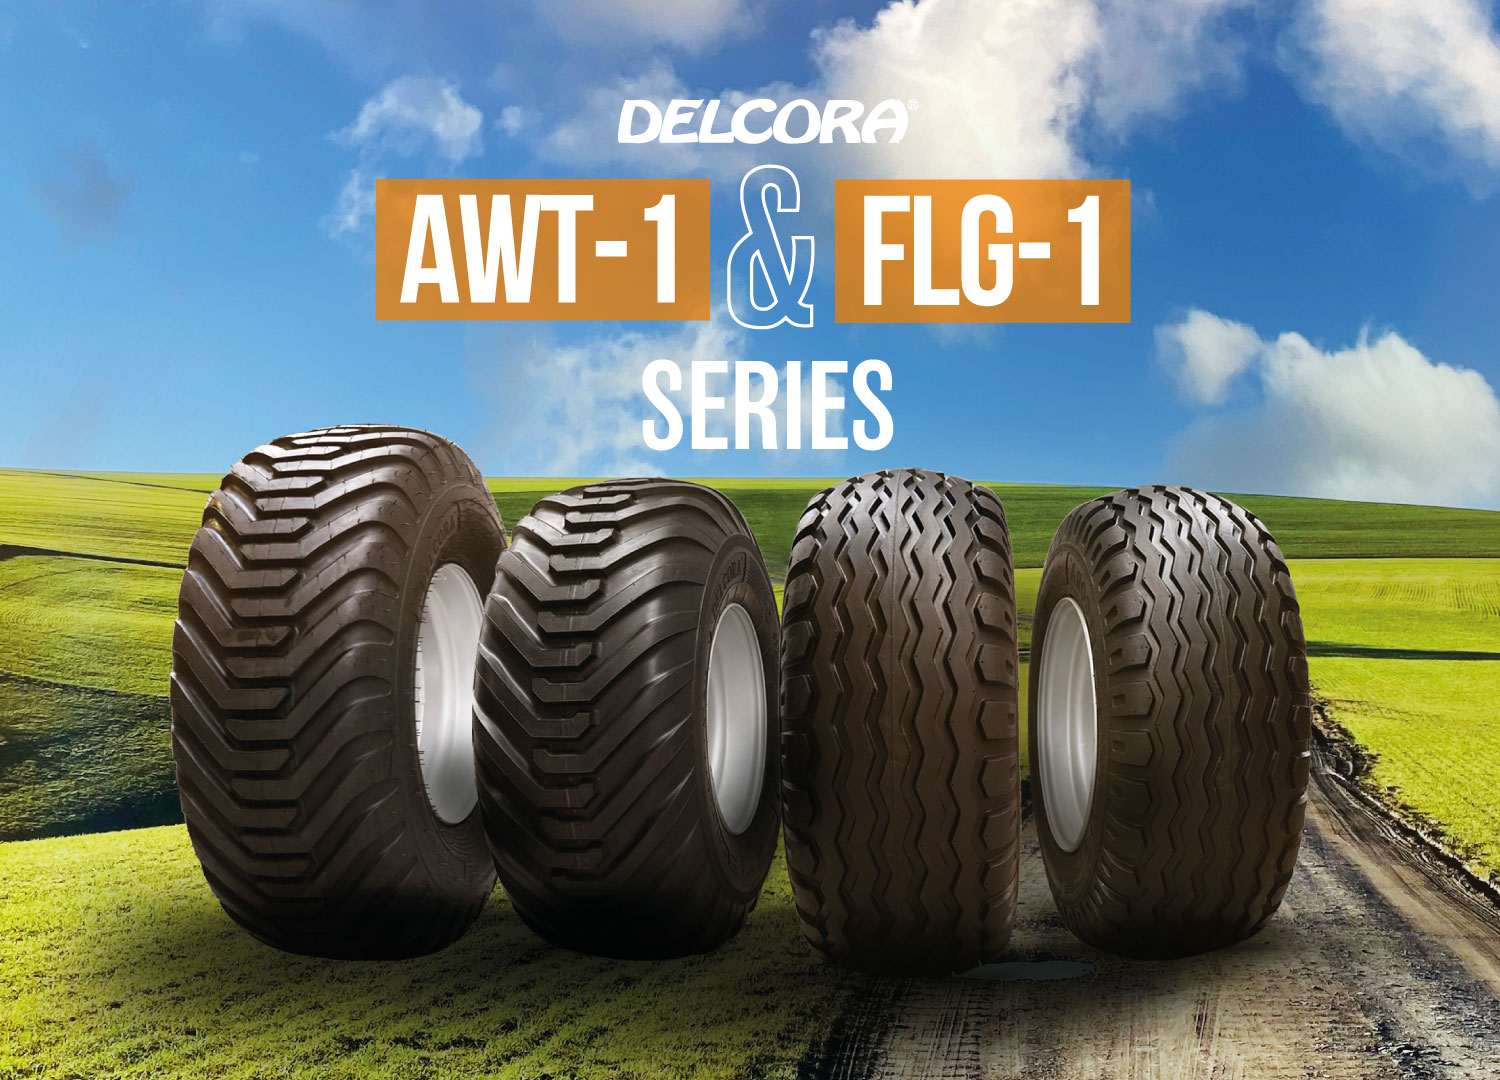 Delcora® Tyres changes the agricultural industry